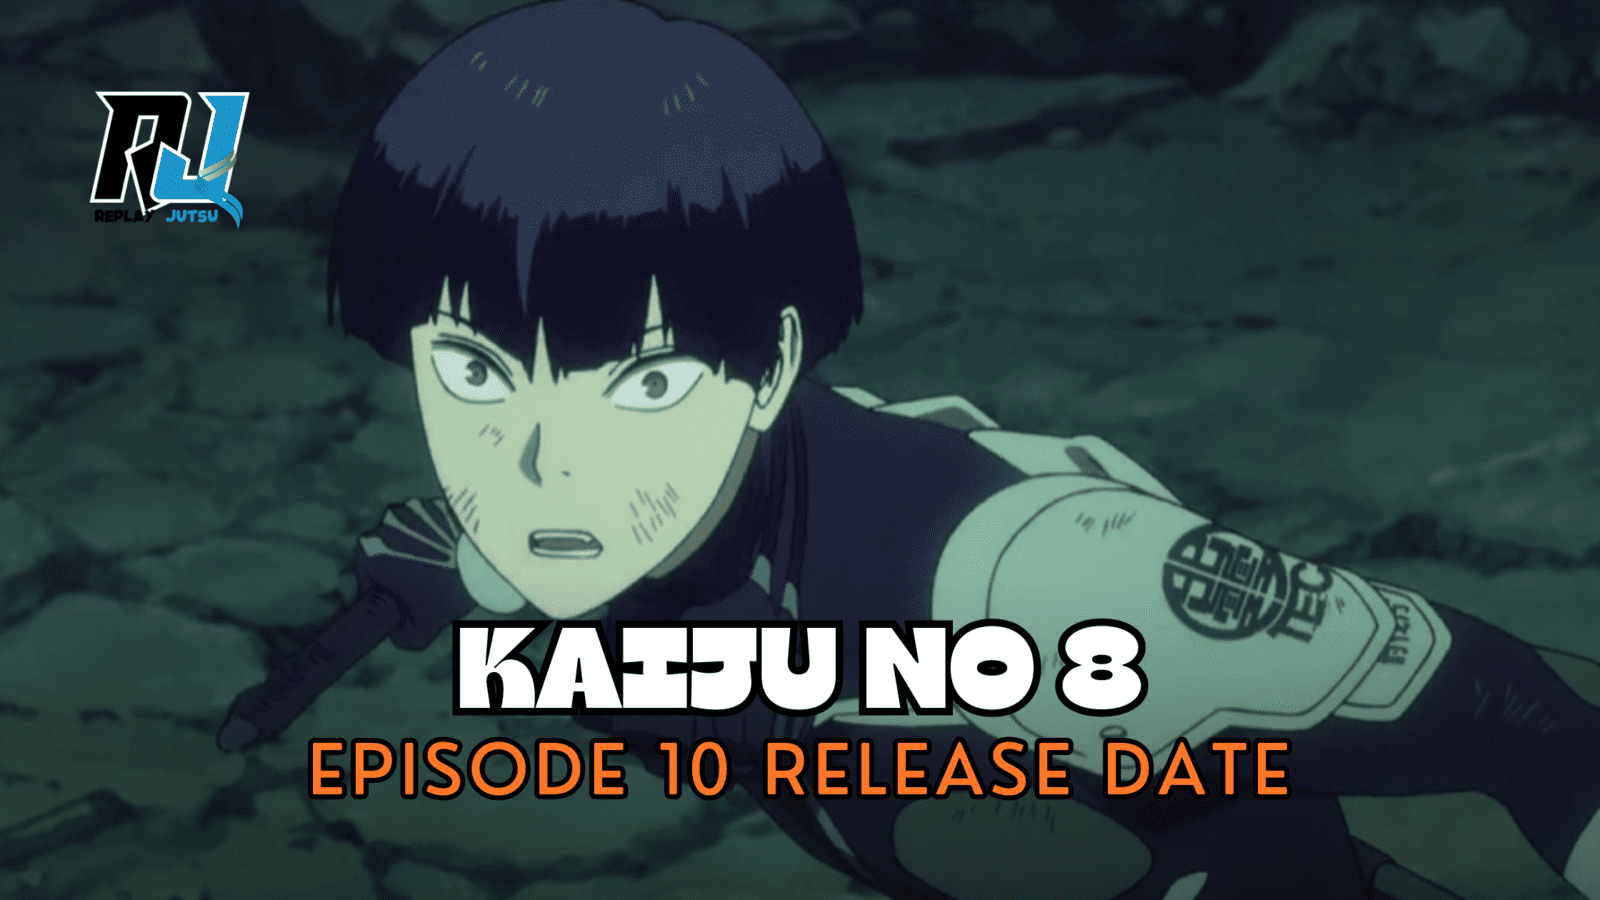 Kaiju No 8 Episode 10 Release Date and What To Expect